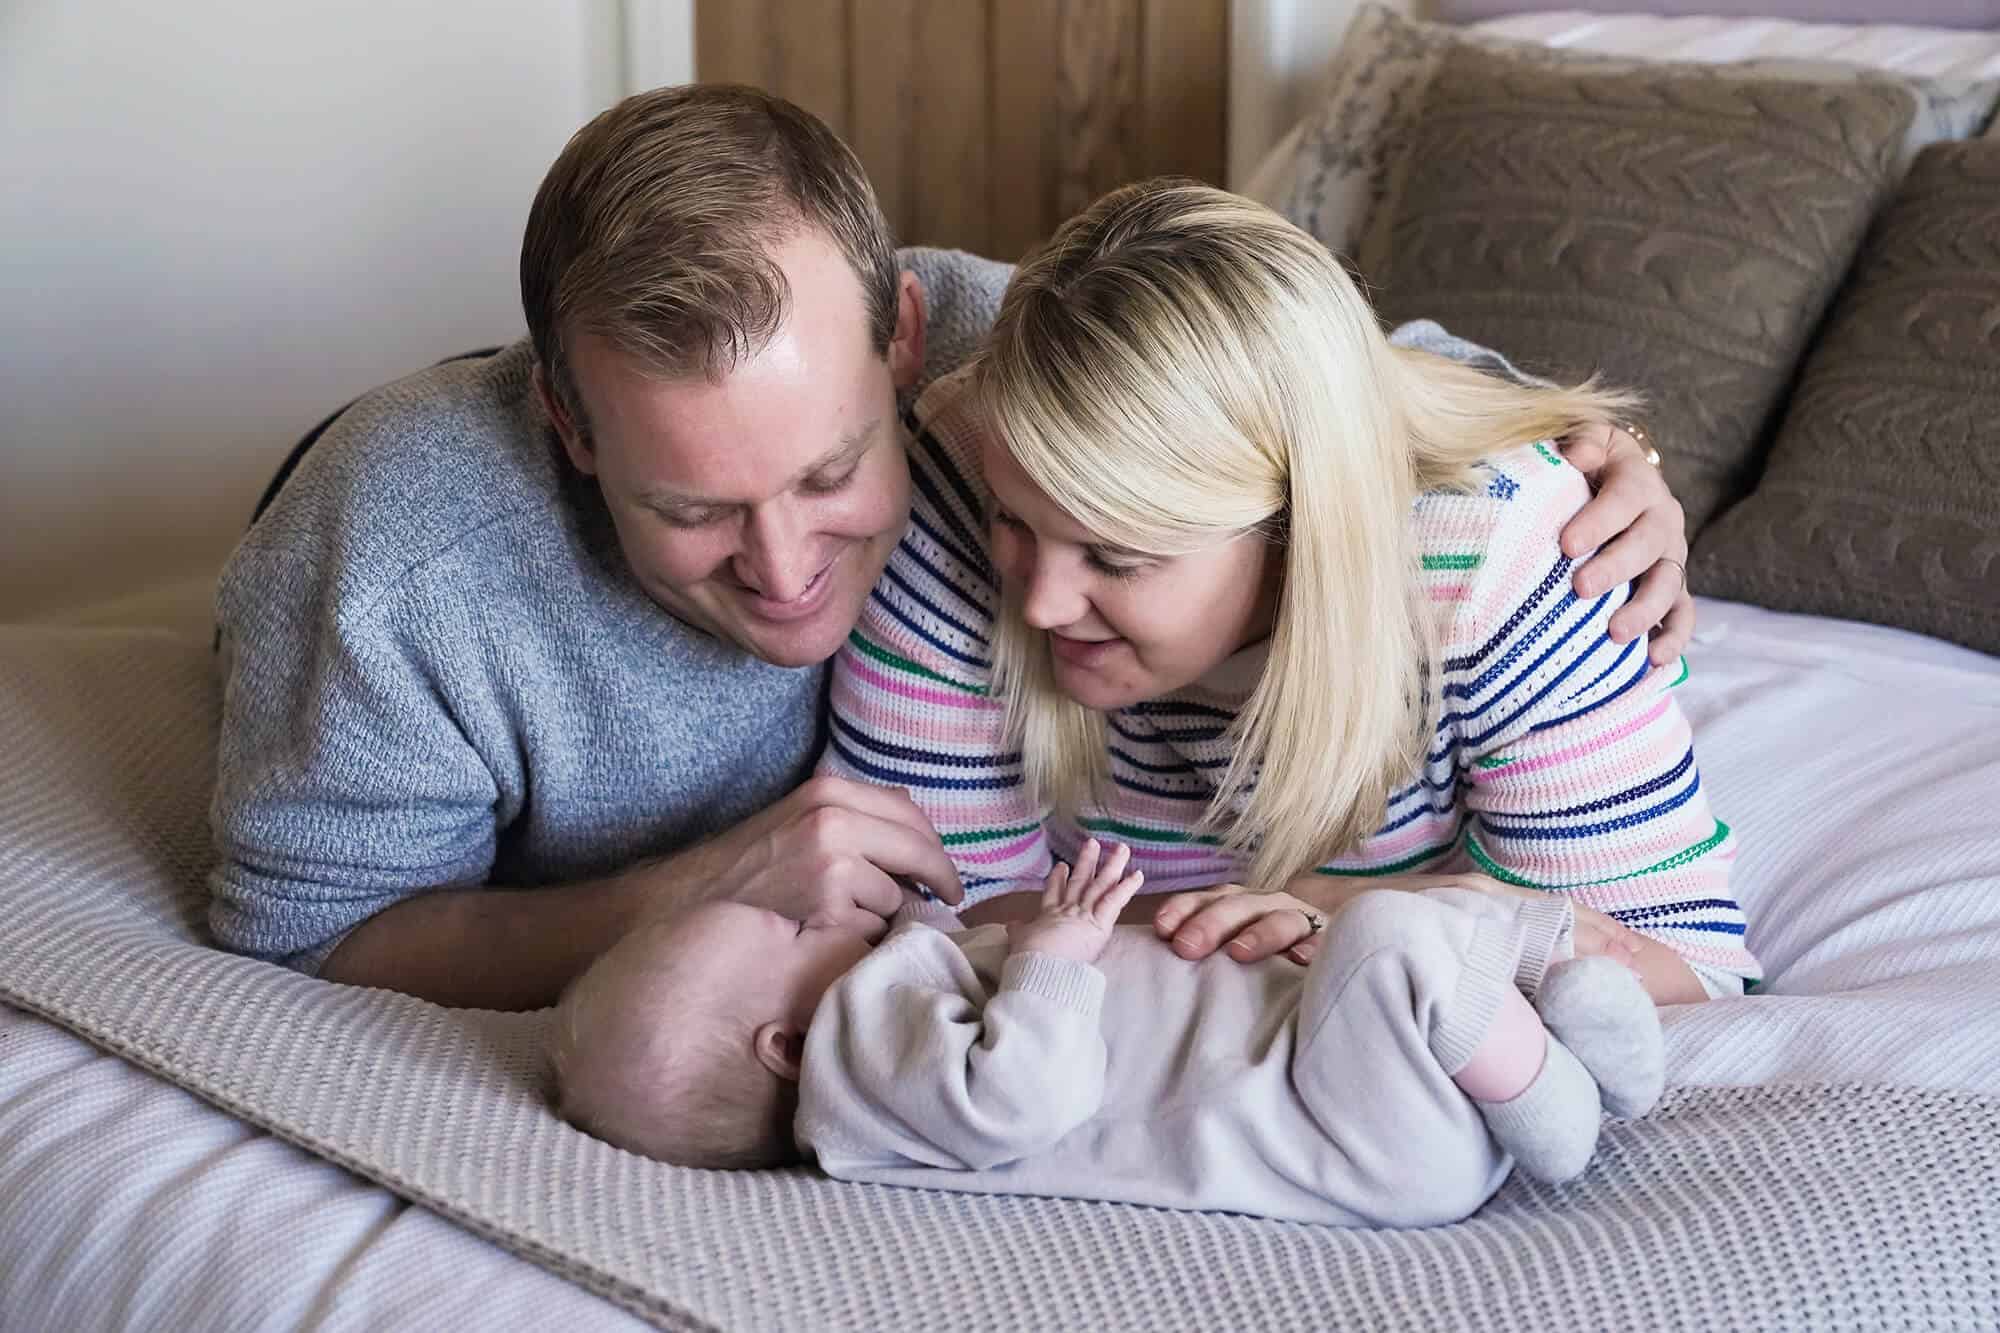 Baby photographer based in Orpington photographing new family at home